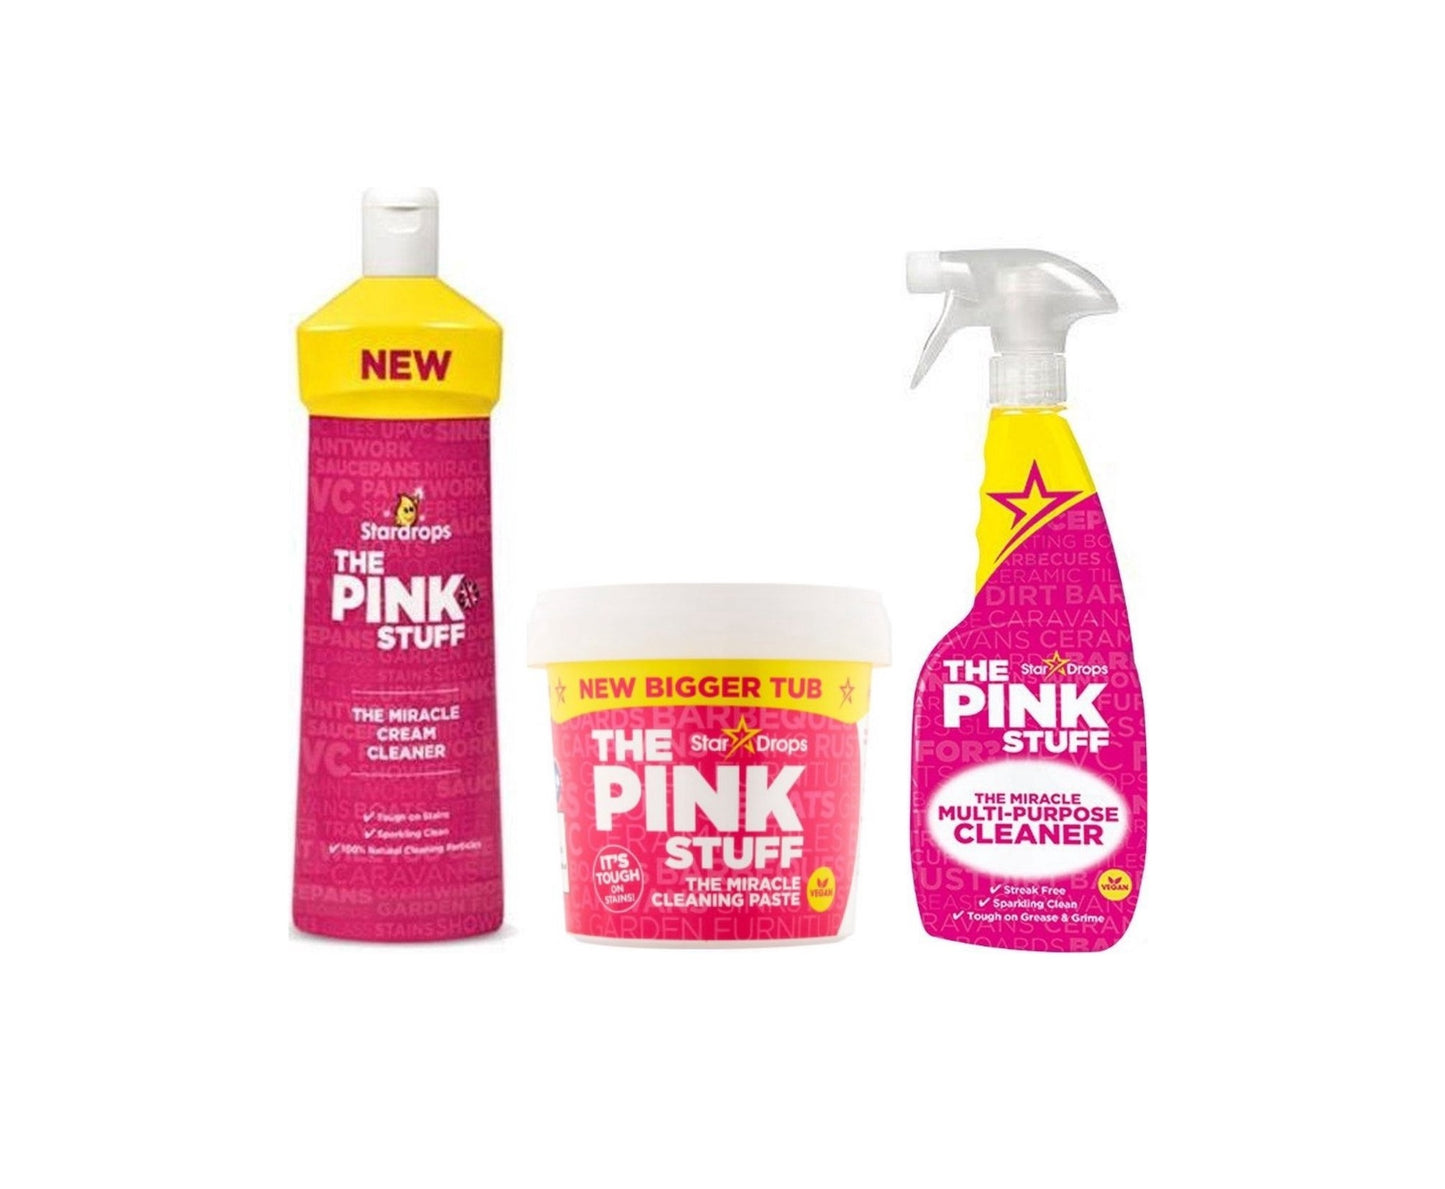 Stardrops, The Stuff Miracle Toilet Cleaner, Pink, 750 ml